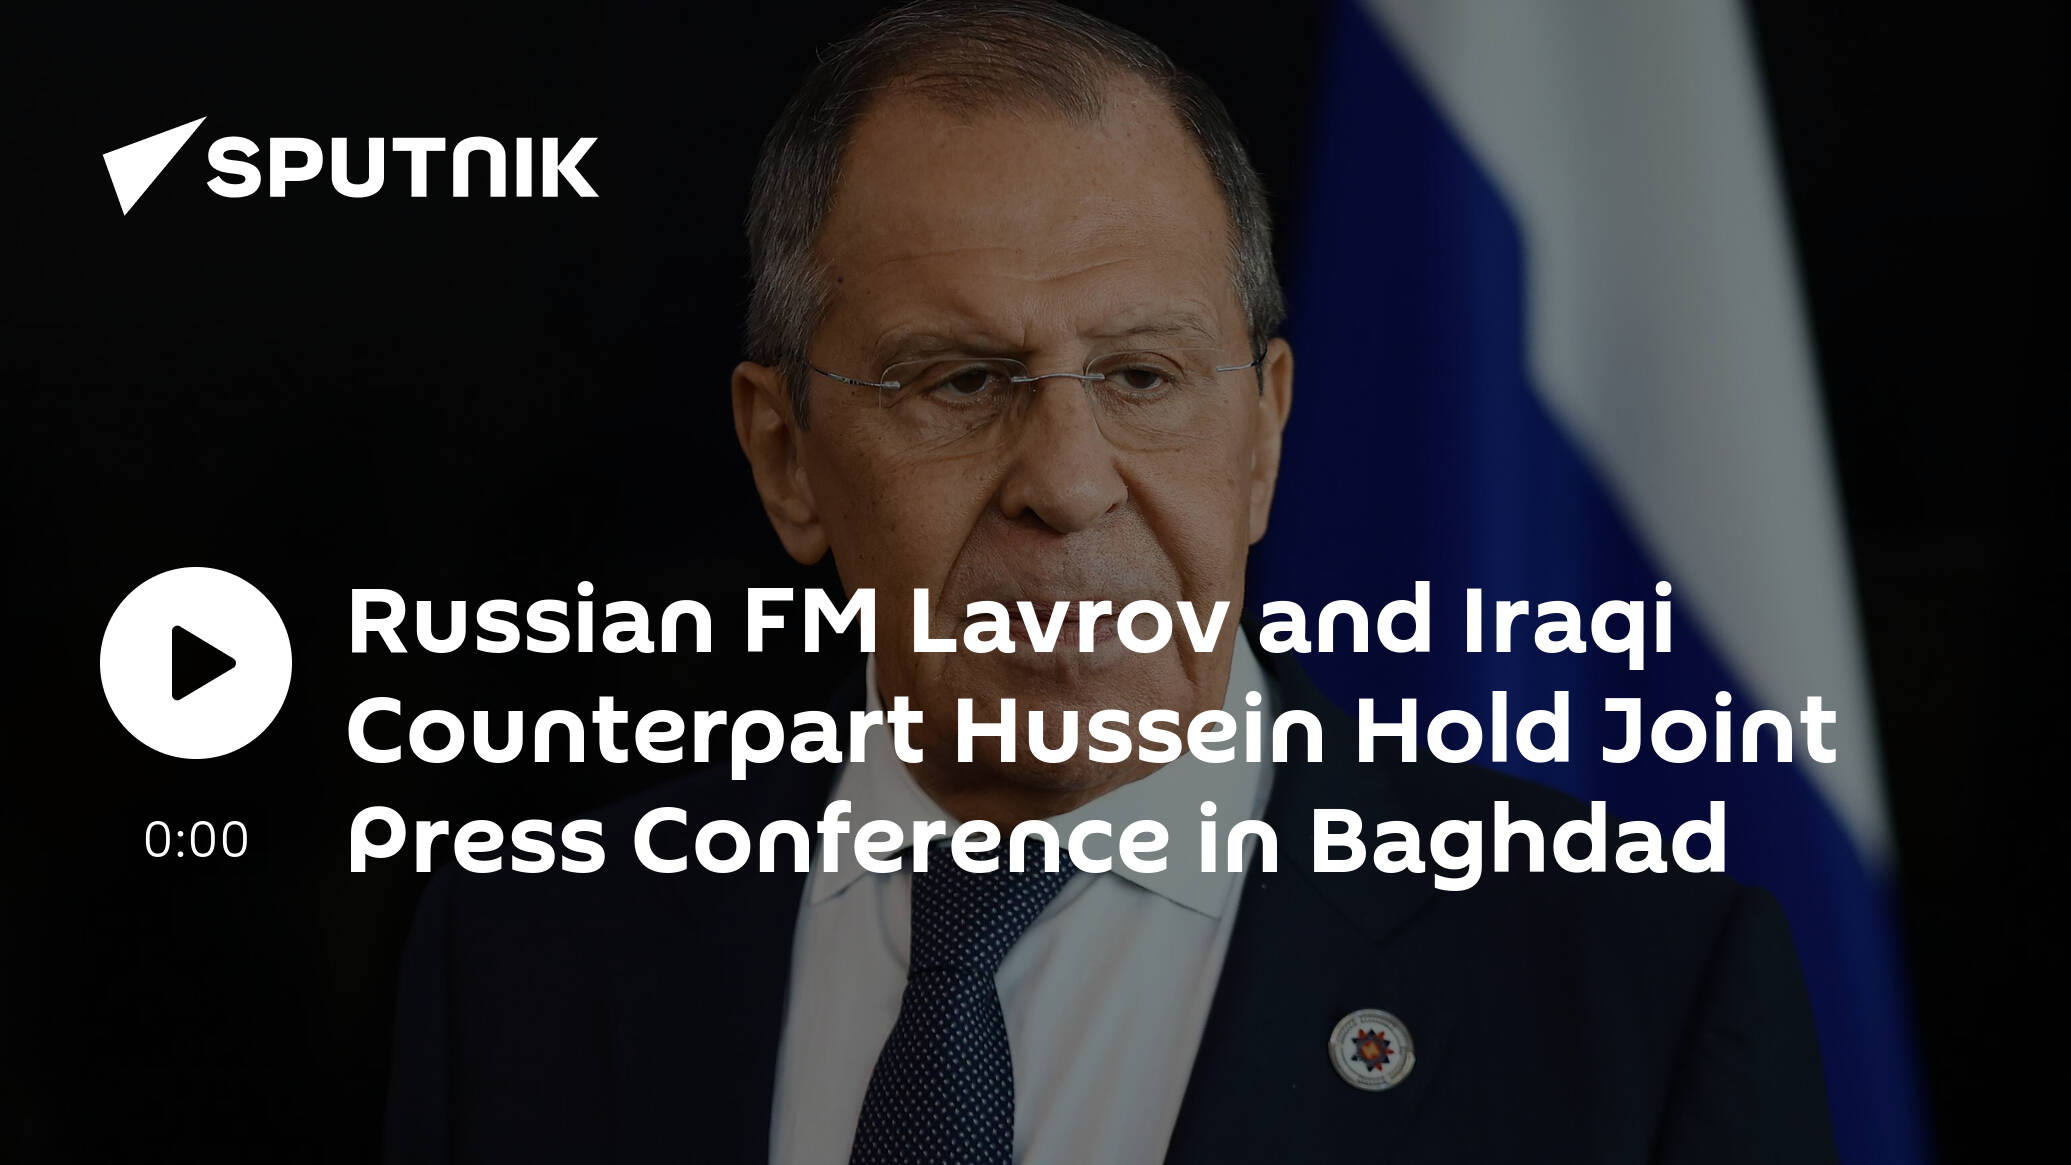 russian-fm-lavrov-and-iraqi-counterpart-hussein-hold-joint-press-conference-in-baghdad